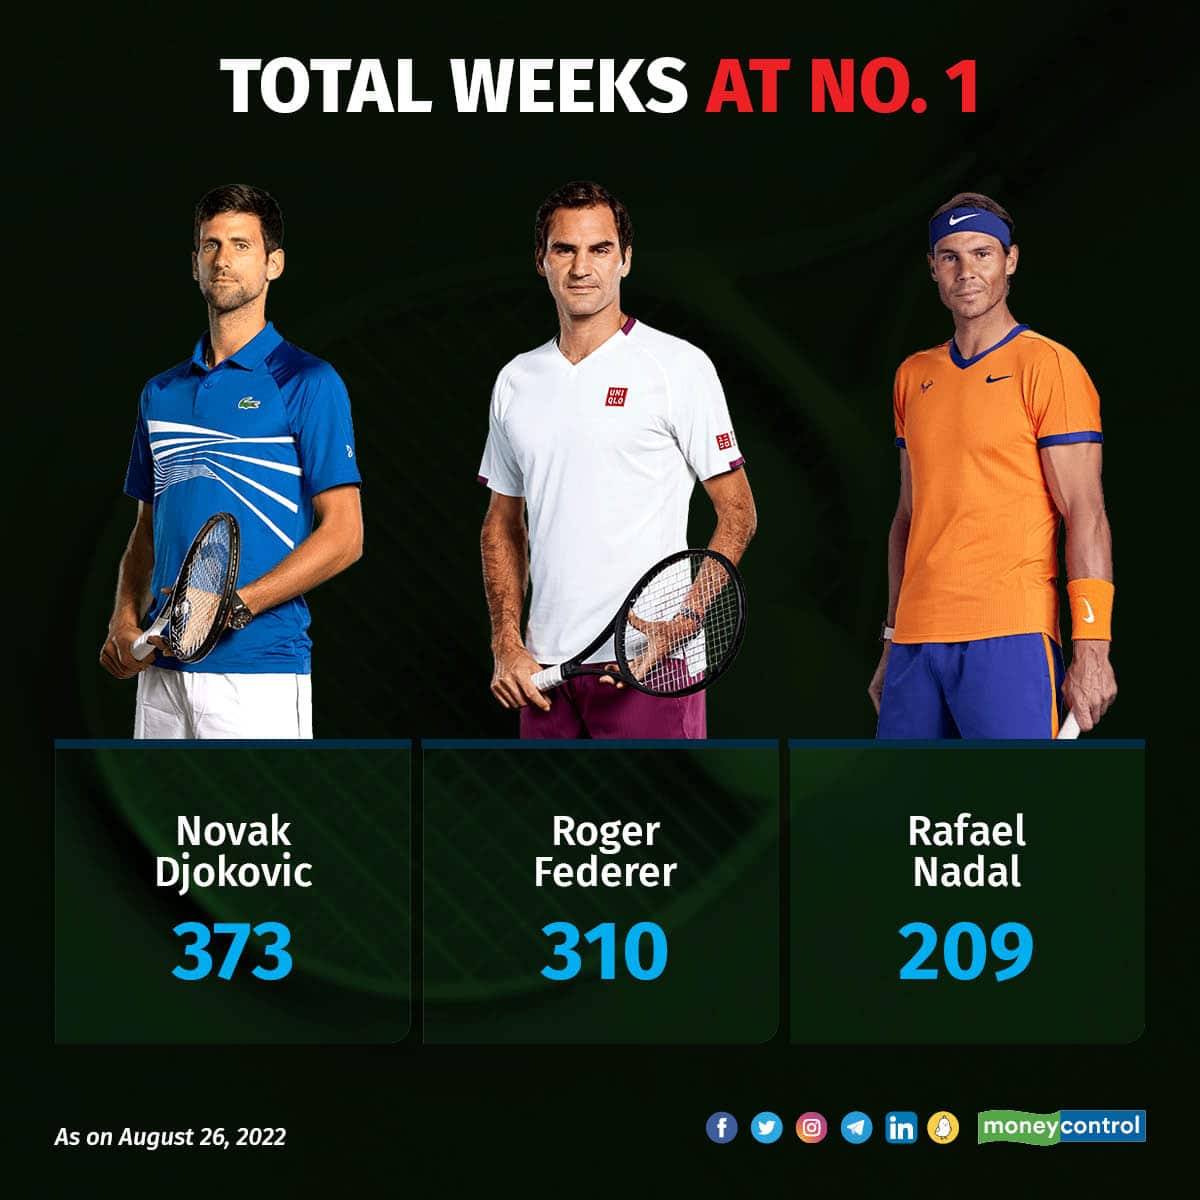 All three players, Djokovic, Nadal and Federer, have been ranked No. 1, at different points in time.